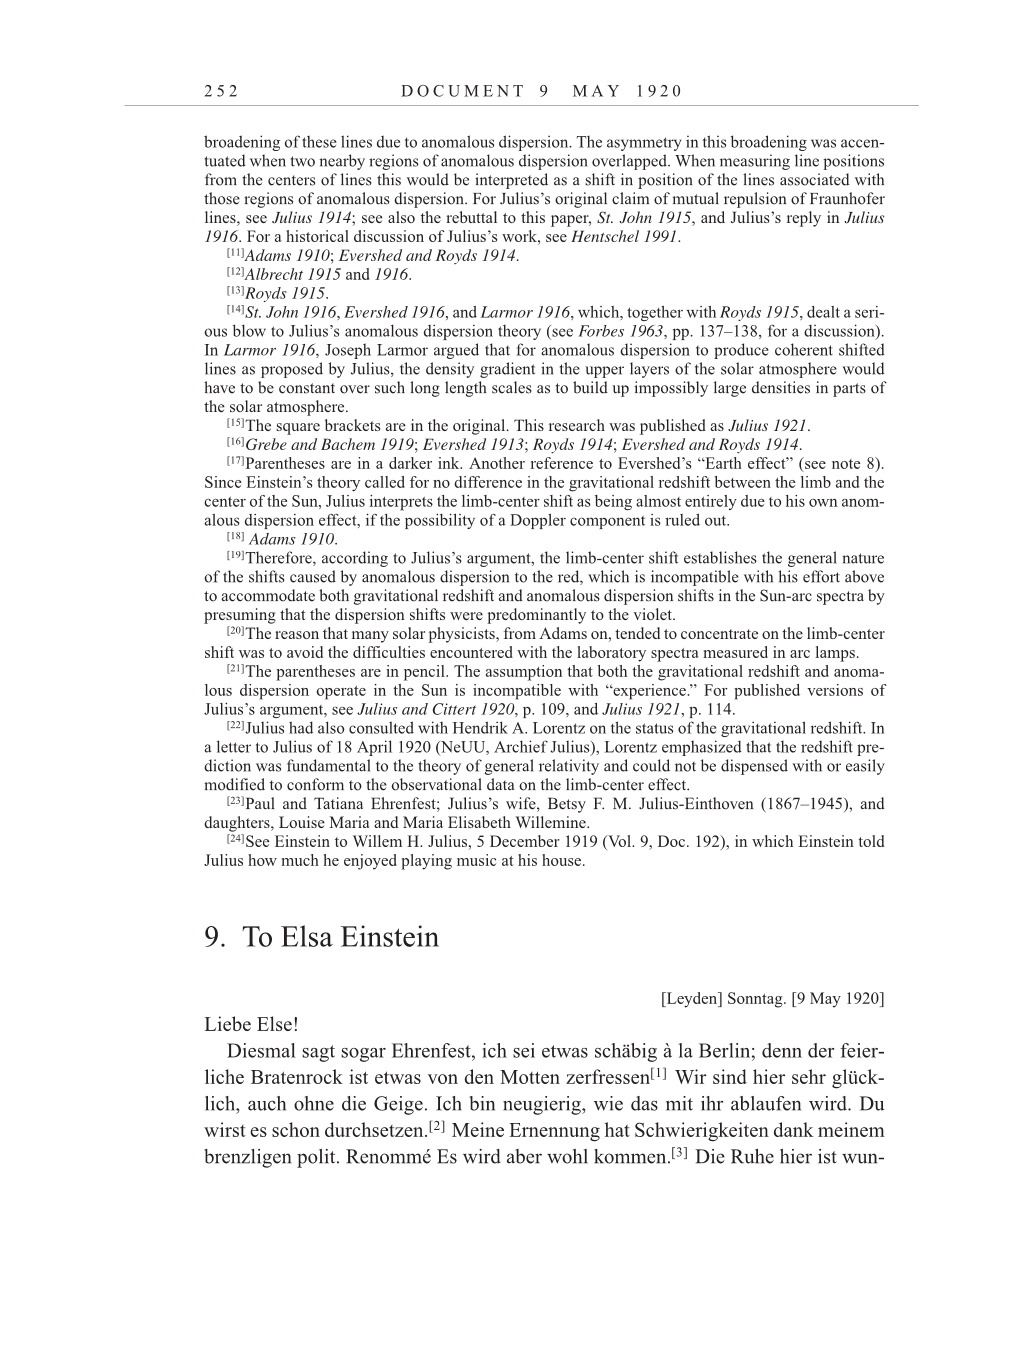 Volume 10: The Berlin Years: Correspondence May-December 1920 / Supplementary Correspondence 1909-1920 page 252